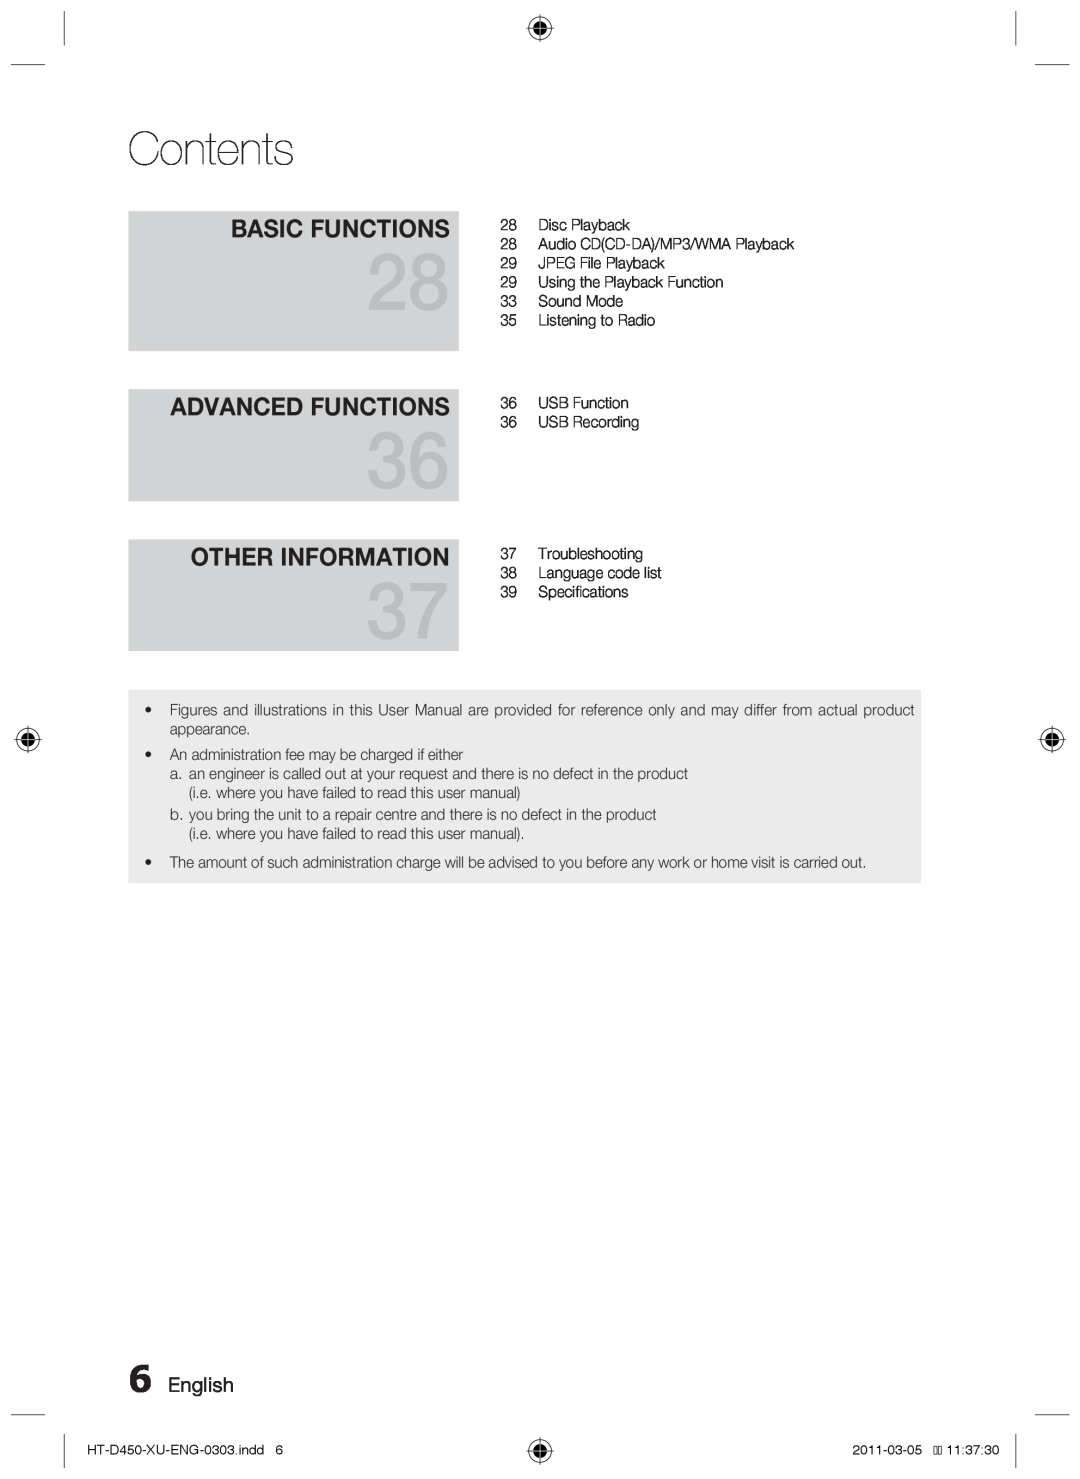 Samsung HT-D450, HT-D455, HT-D453 user manual Basic Functions, Advanced Functions, Other Information, Contents, English 